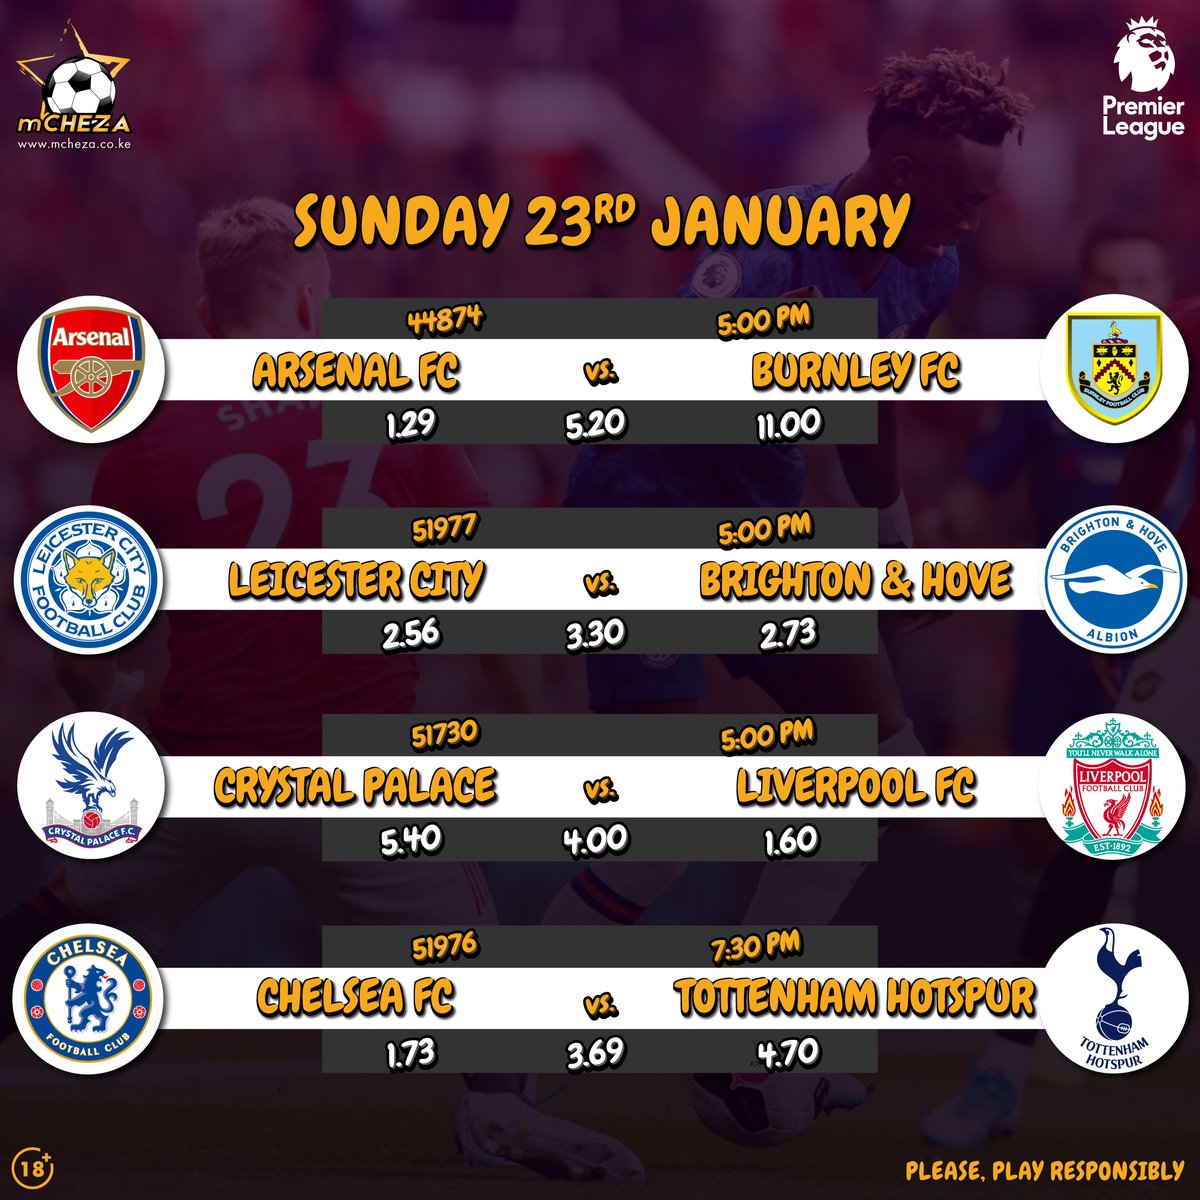 After a sensational showcase of brilliance and resilience in the English #PL, we still have more in store for you this Sunday Afternoon from 5 pm inclusive of the match banger between Chelsea and Spurs later today.

#mCHEZAKE
#PremierLeague
#PL
#ShindaNamCHEZA
#ChezaNamCHEZA https://t.co/HXpNQvY7Ls